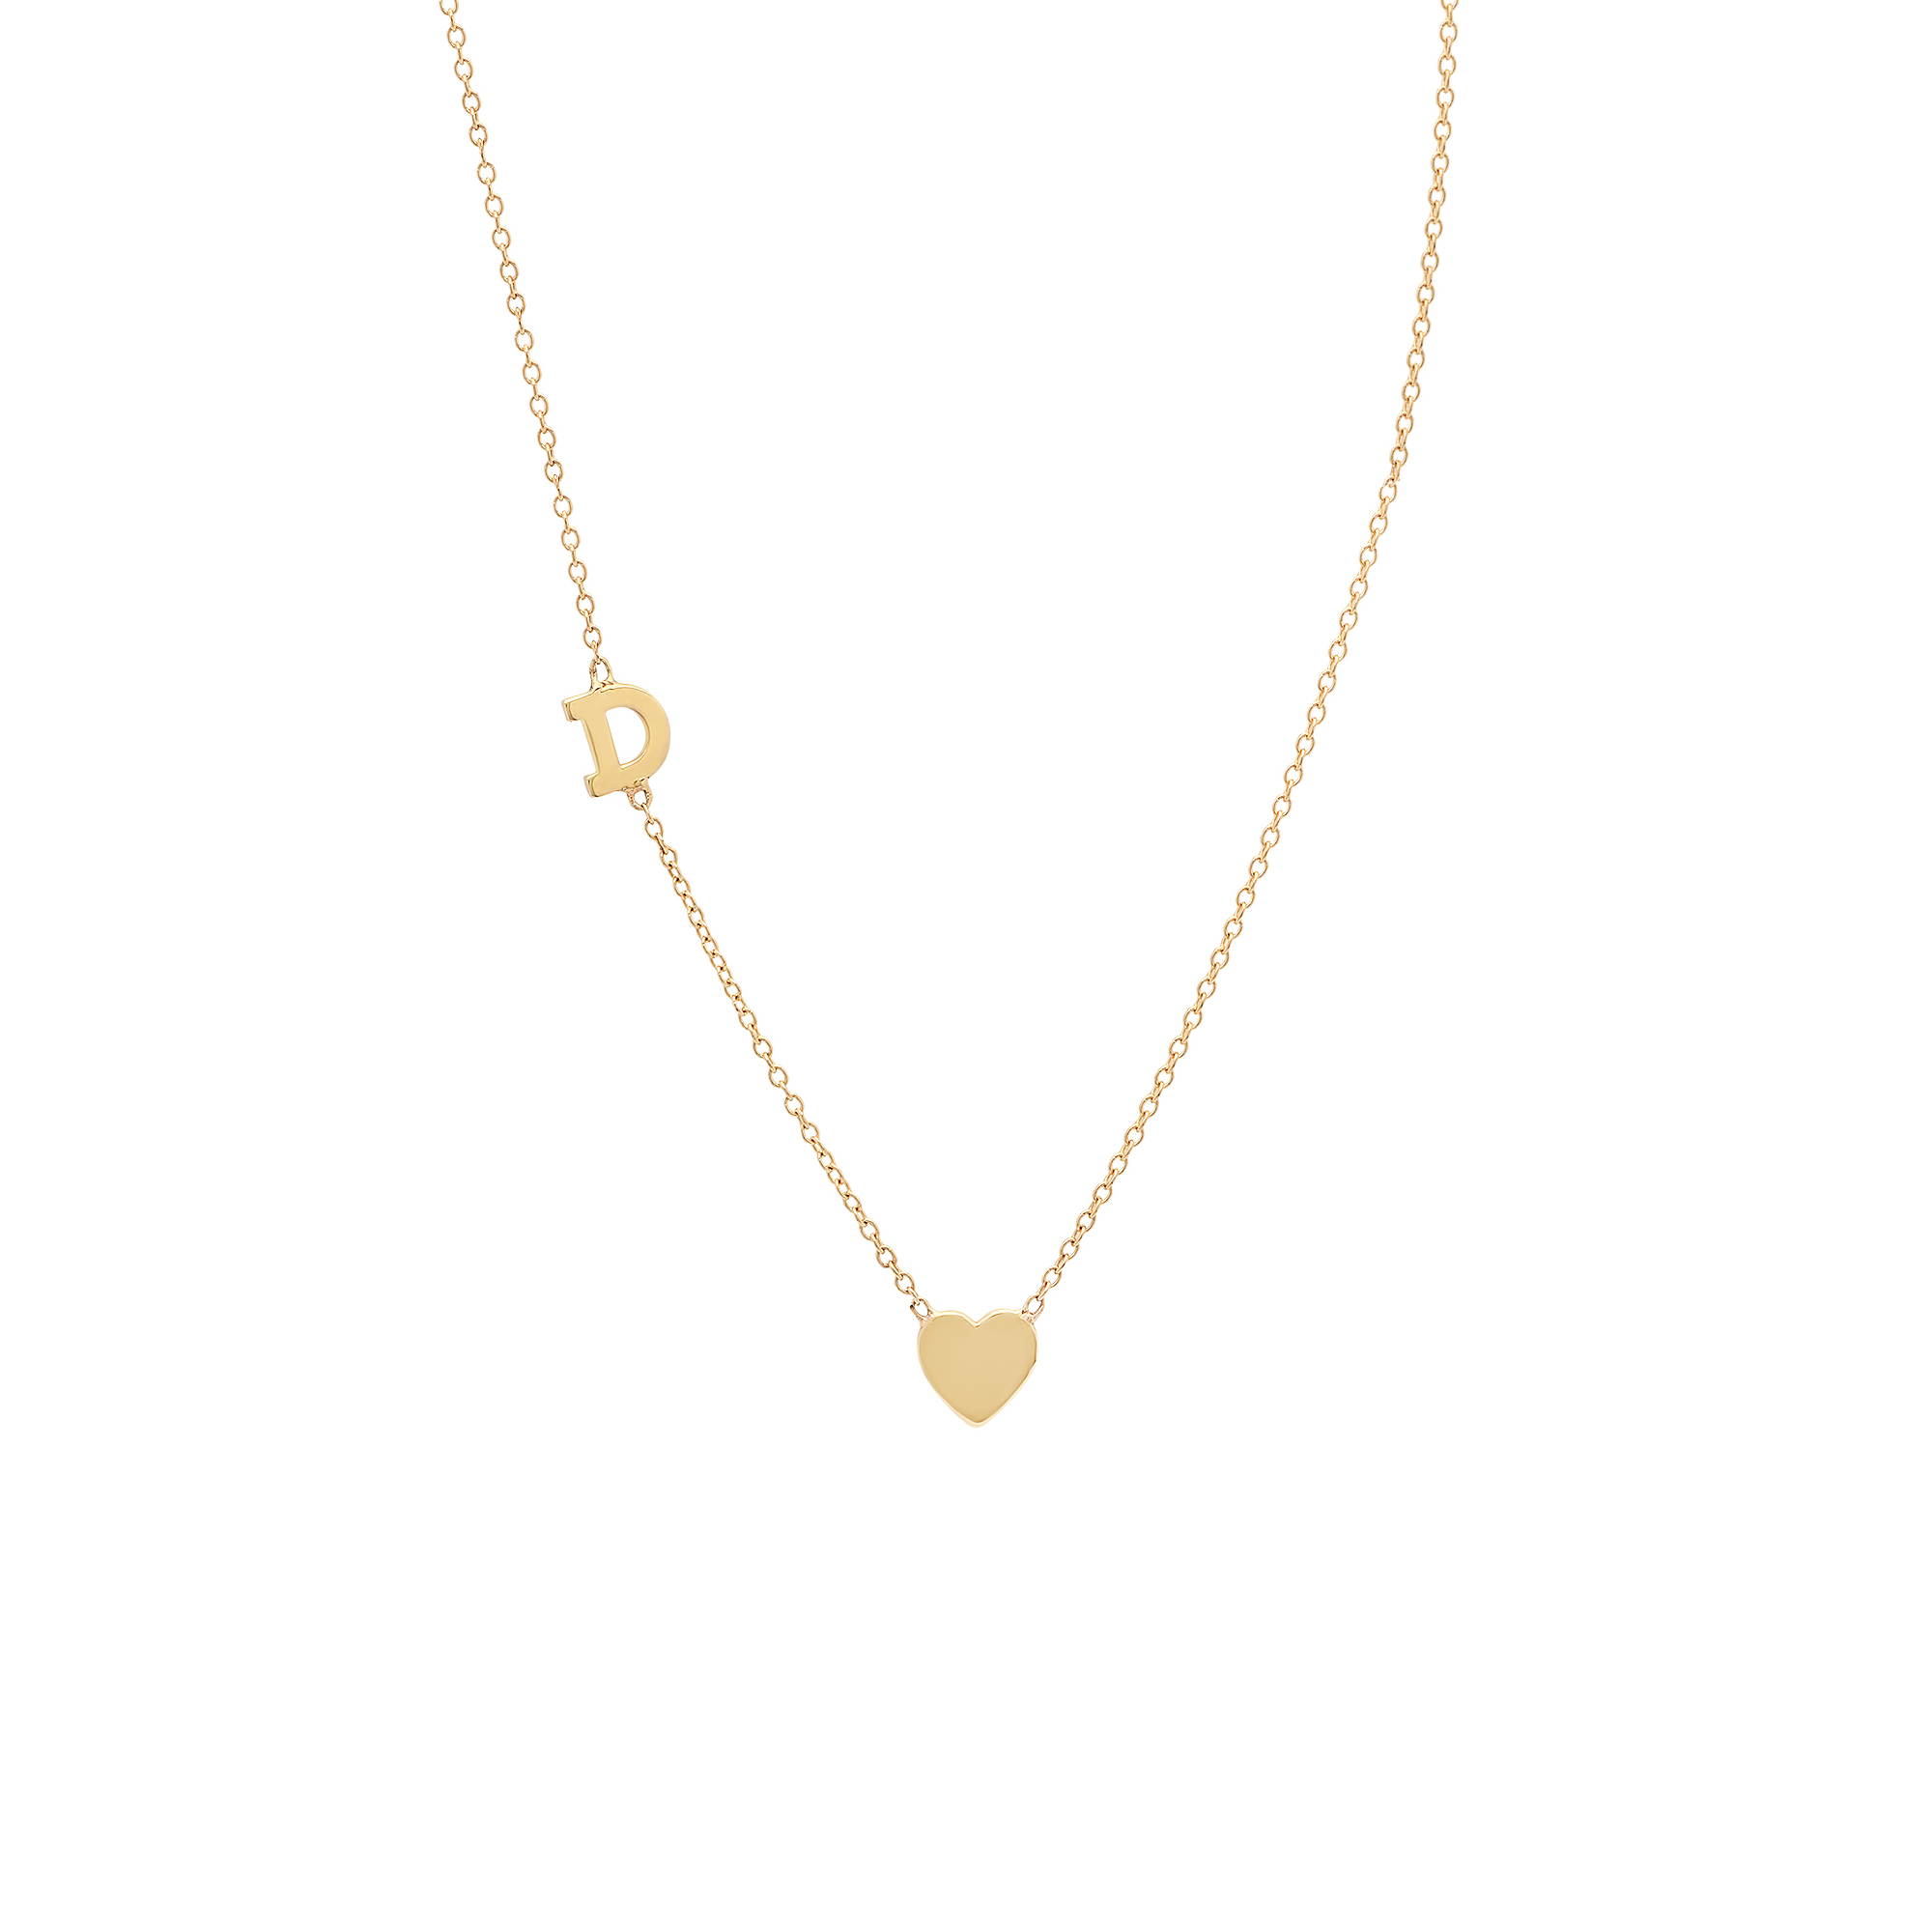 Gold Heart Initial Necklace p Gold Initial Heart Letter Necklace Pendant  18K Gold Plated Including Free Gift Box & Bag - Etsy | Initial necklace, Initial  necklace gold, Pretty necklaces